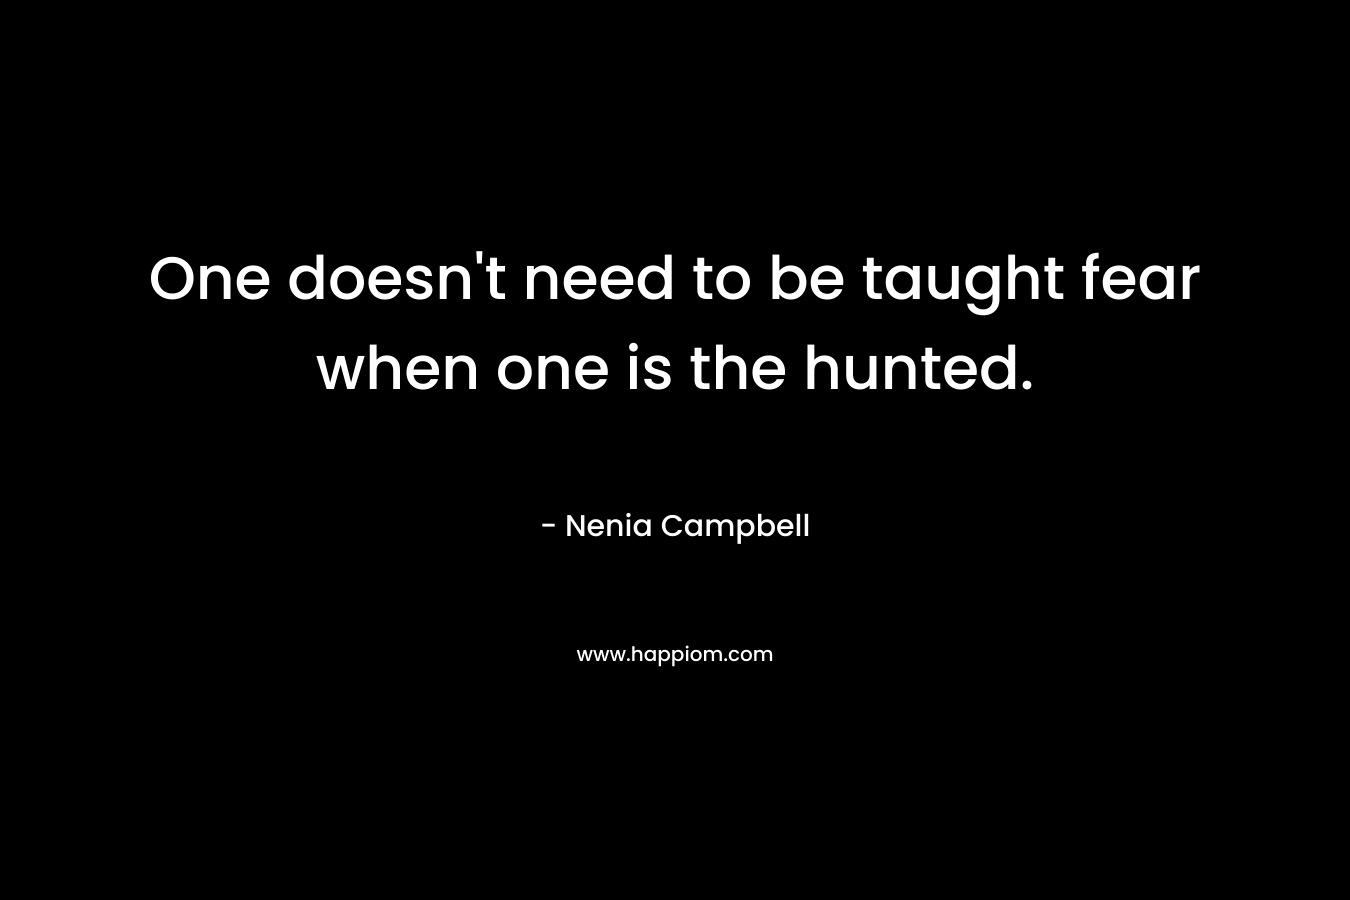 One doesn't need to be taught fear when one is the hunted.